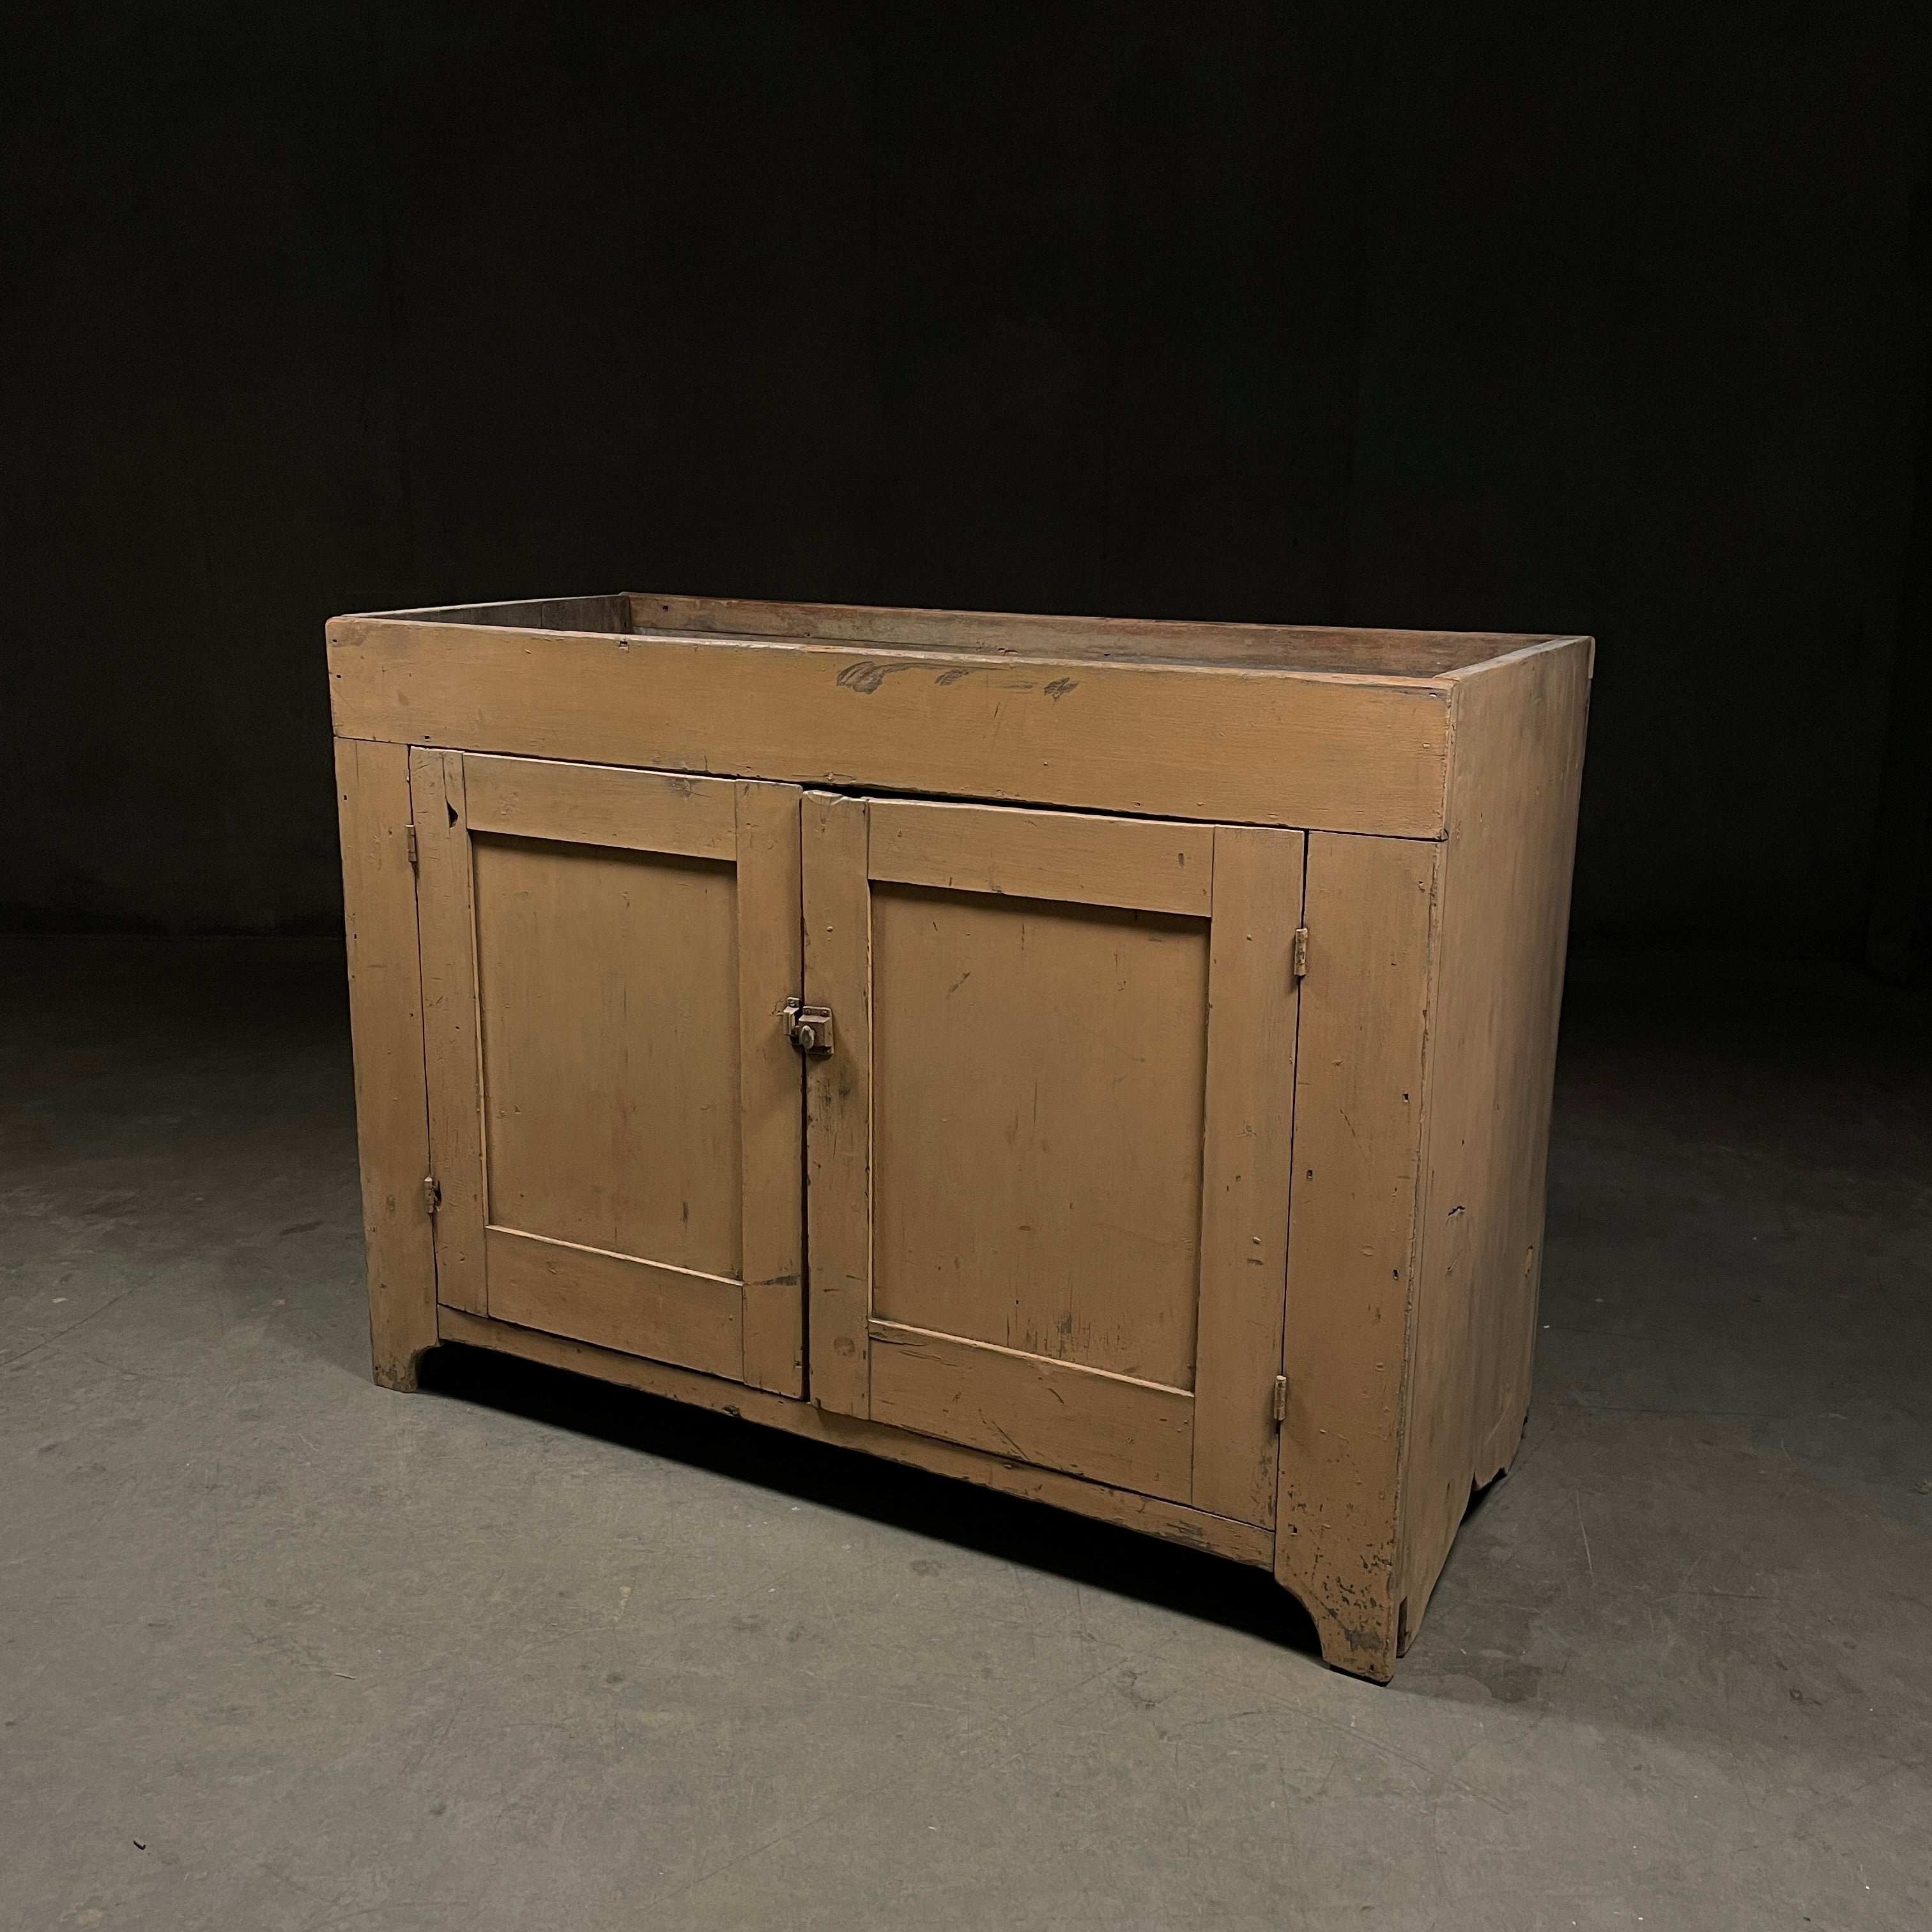 1880 pine country Dry Sink cabinet